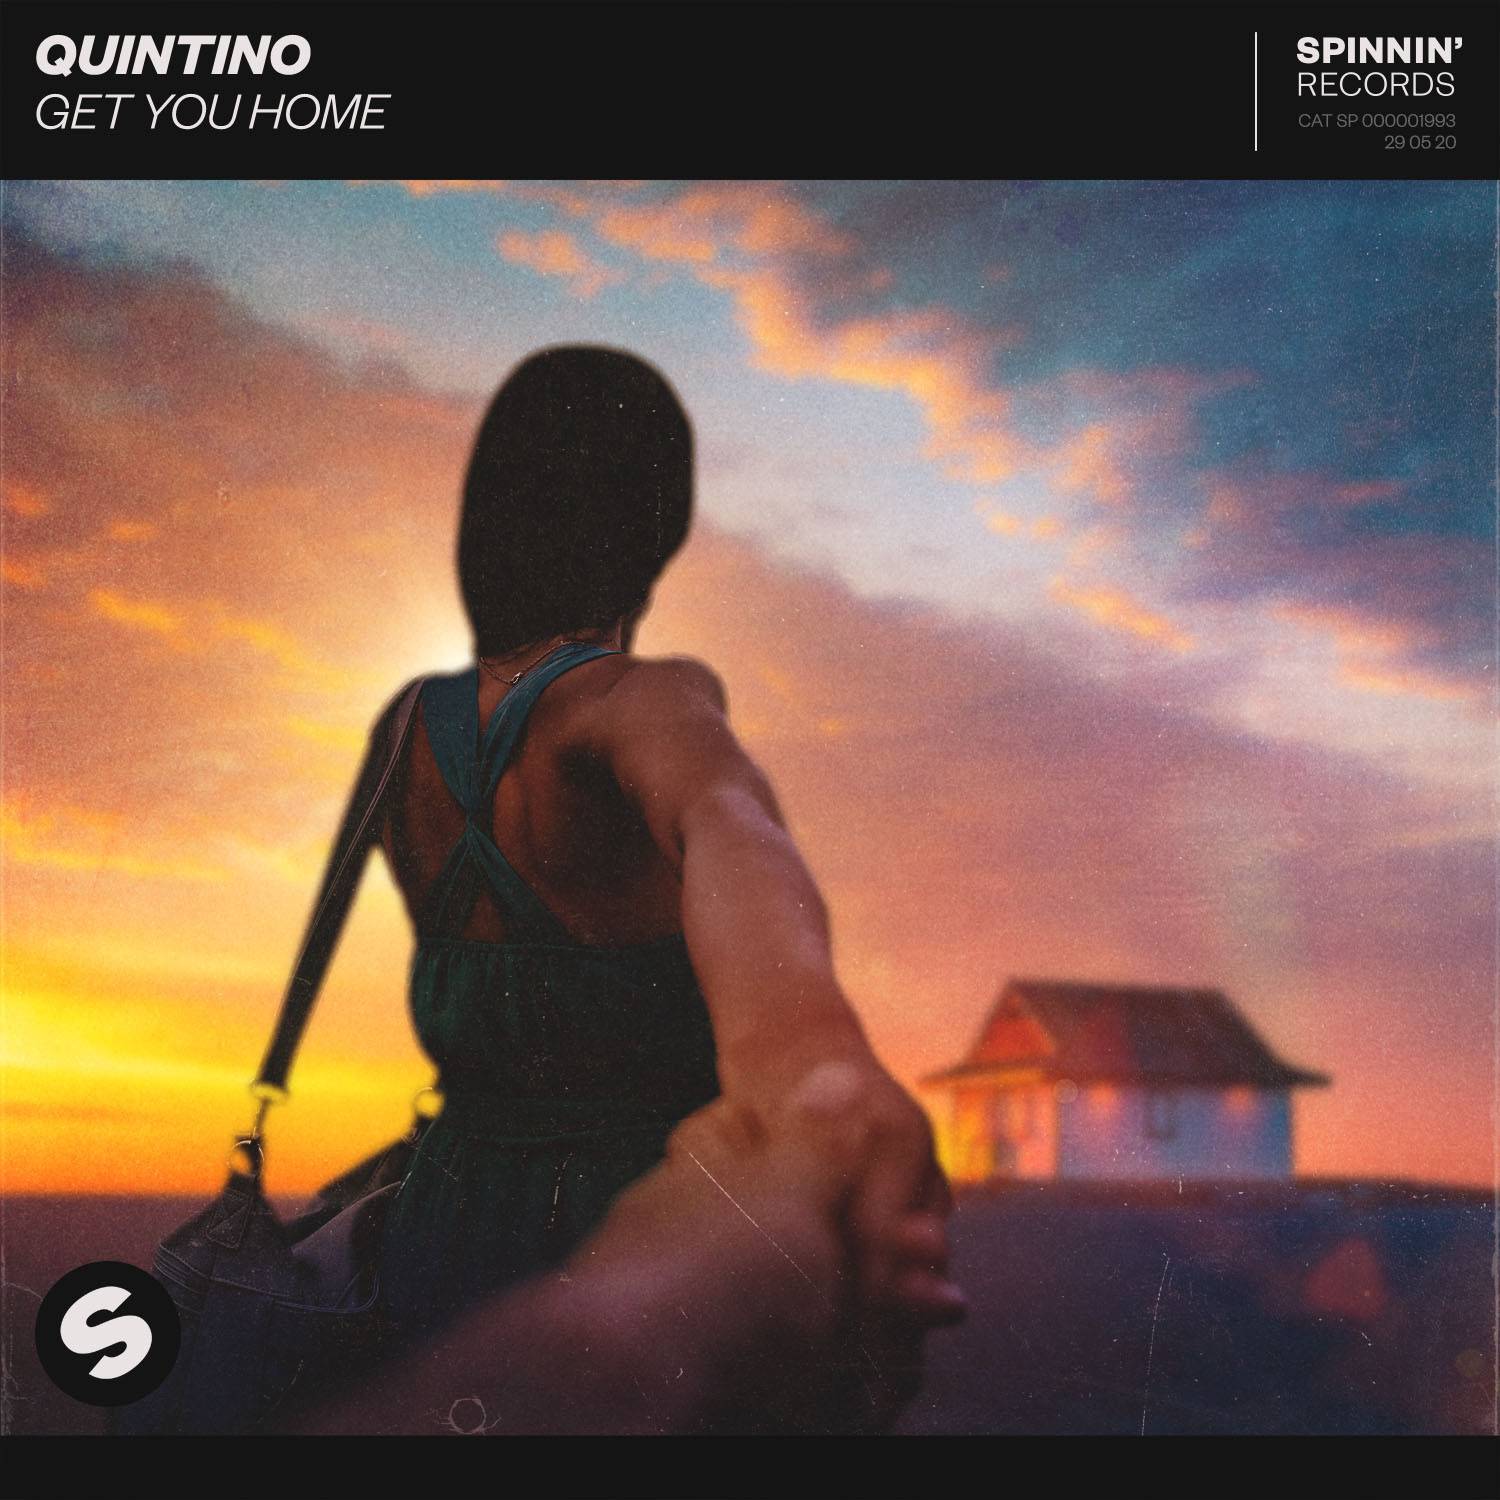 Quitino Get You Home on Spinnin Records